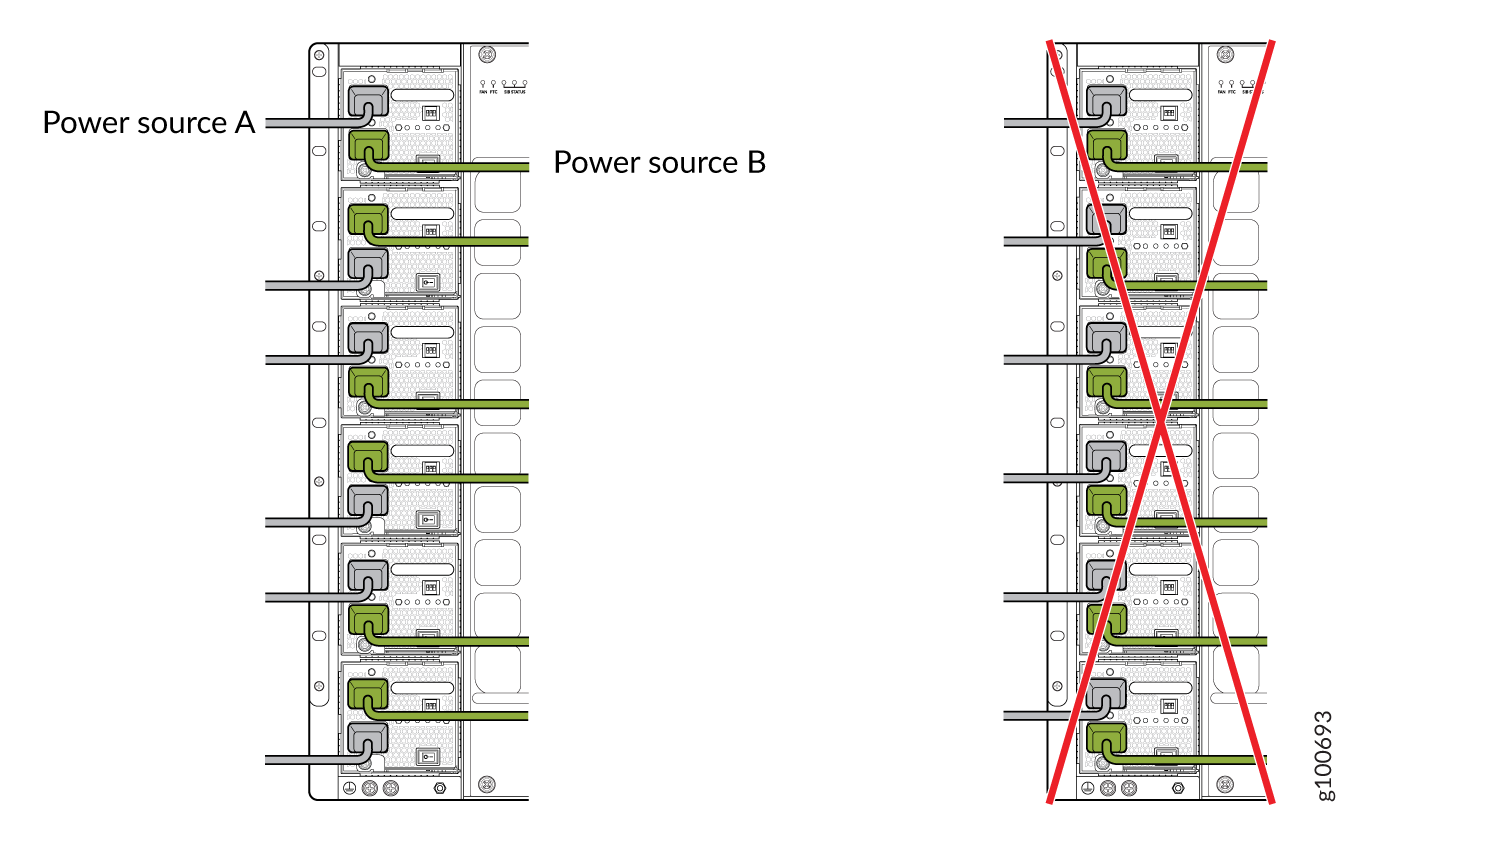 Proper Load Balancing for QFX10000-PWR-AC Power Cables on QFX10008